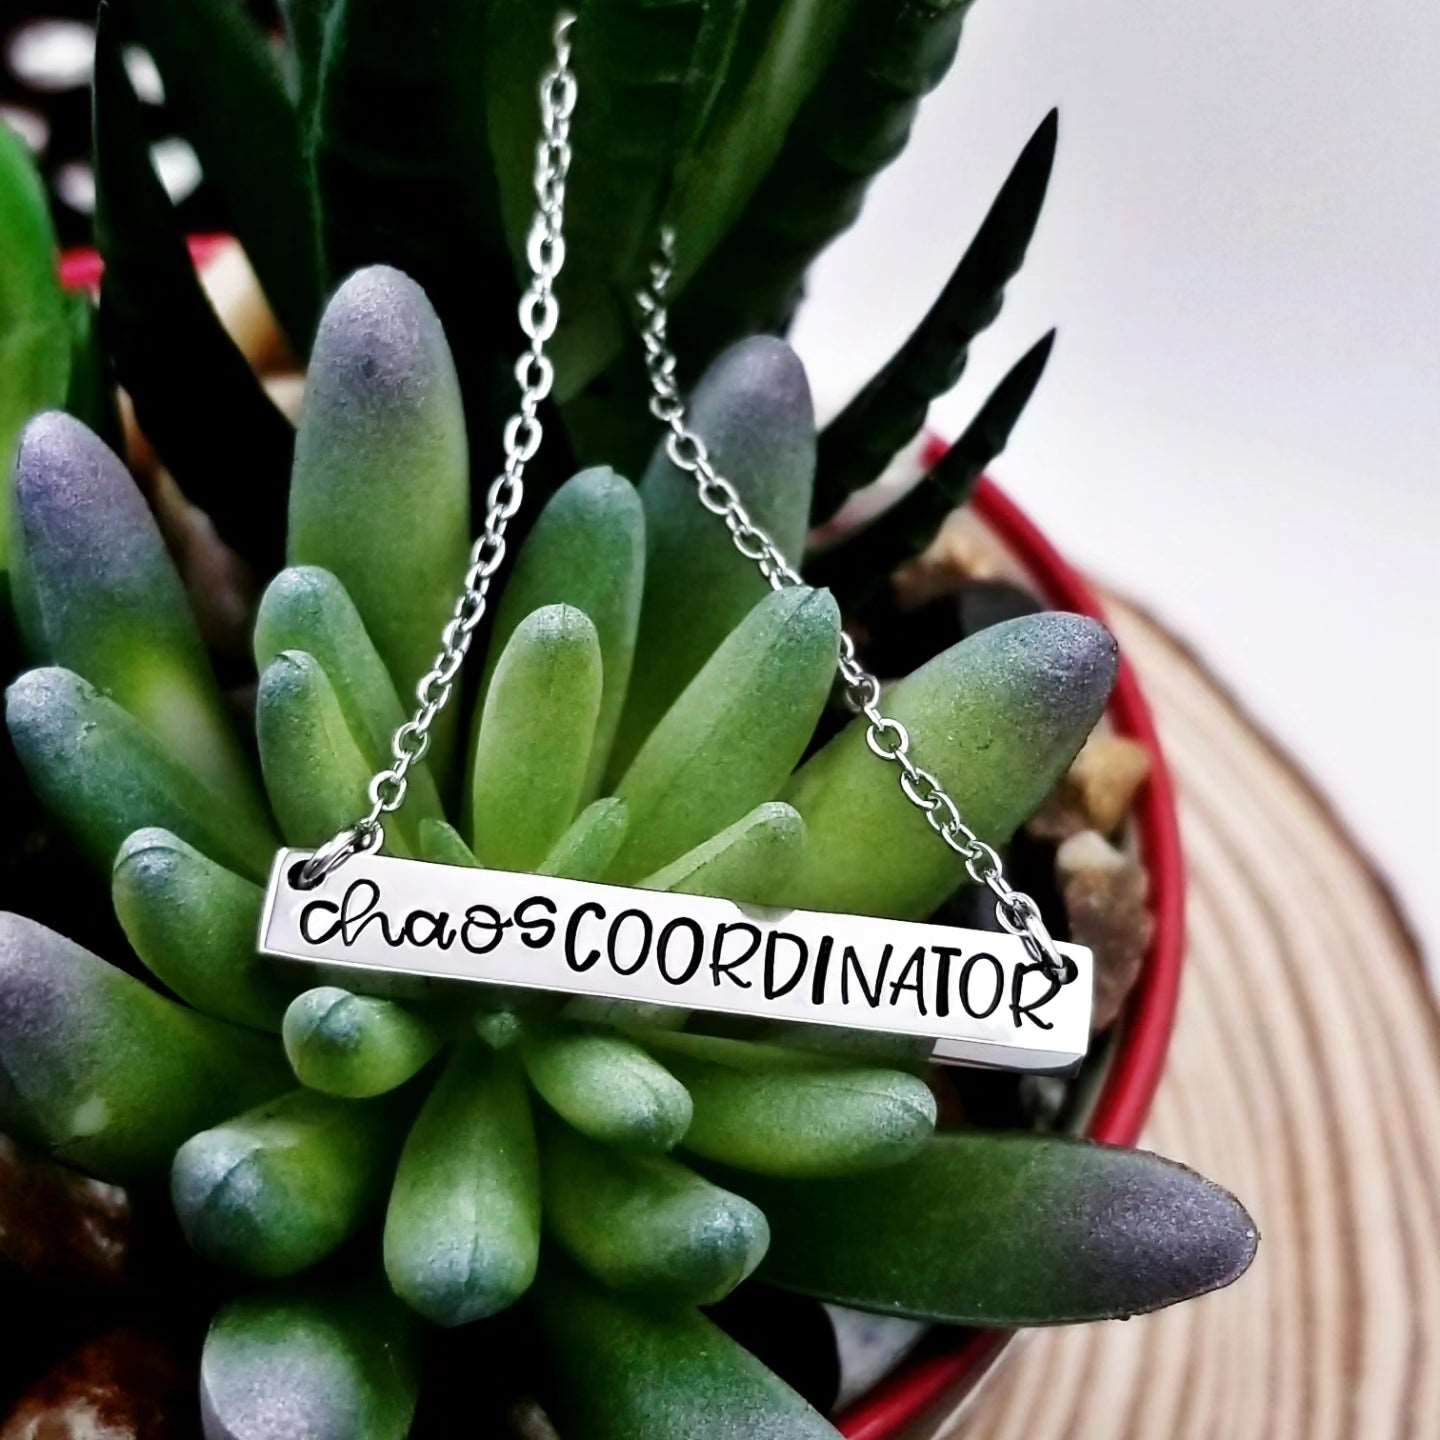 Chaos Coordinator Necklace, Chaos Coordinator Gift, Bar necklace, Customized Name Necklace, Stainless Steel Necklace, Custom hand stamped Necklace, Personalized Necklace, Silver Bar Necklace